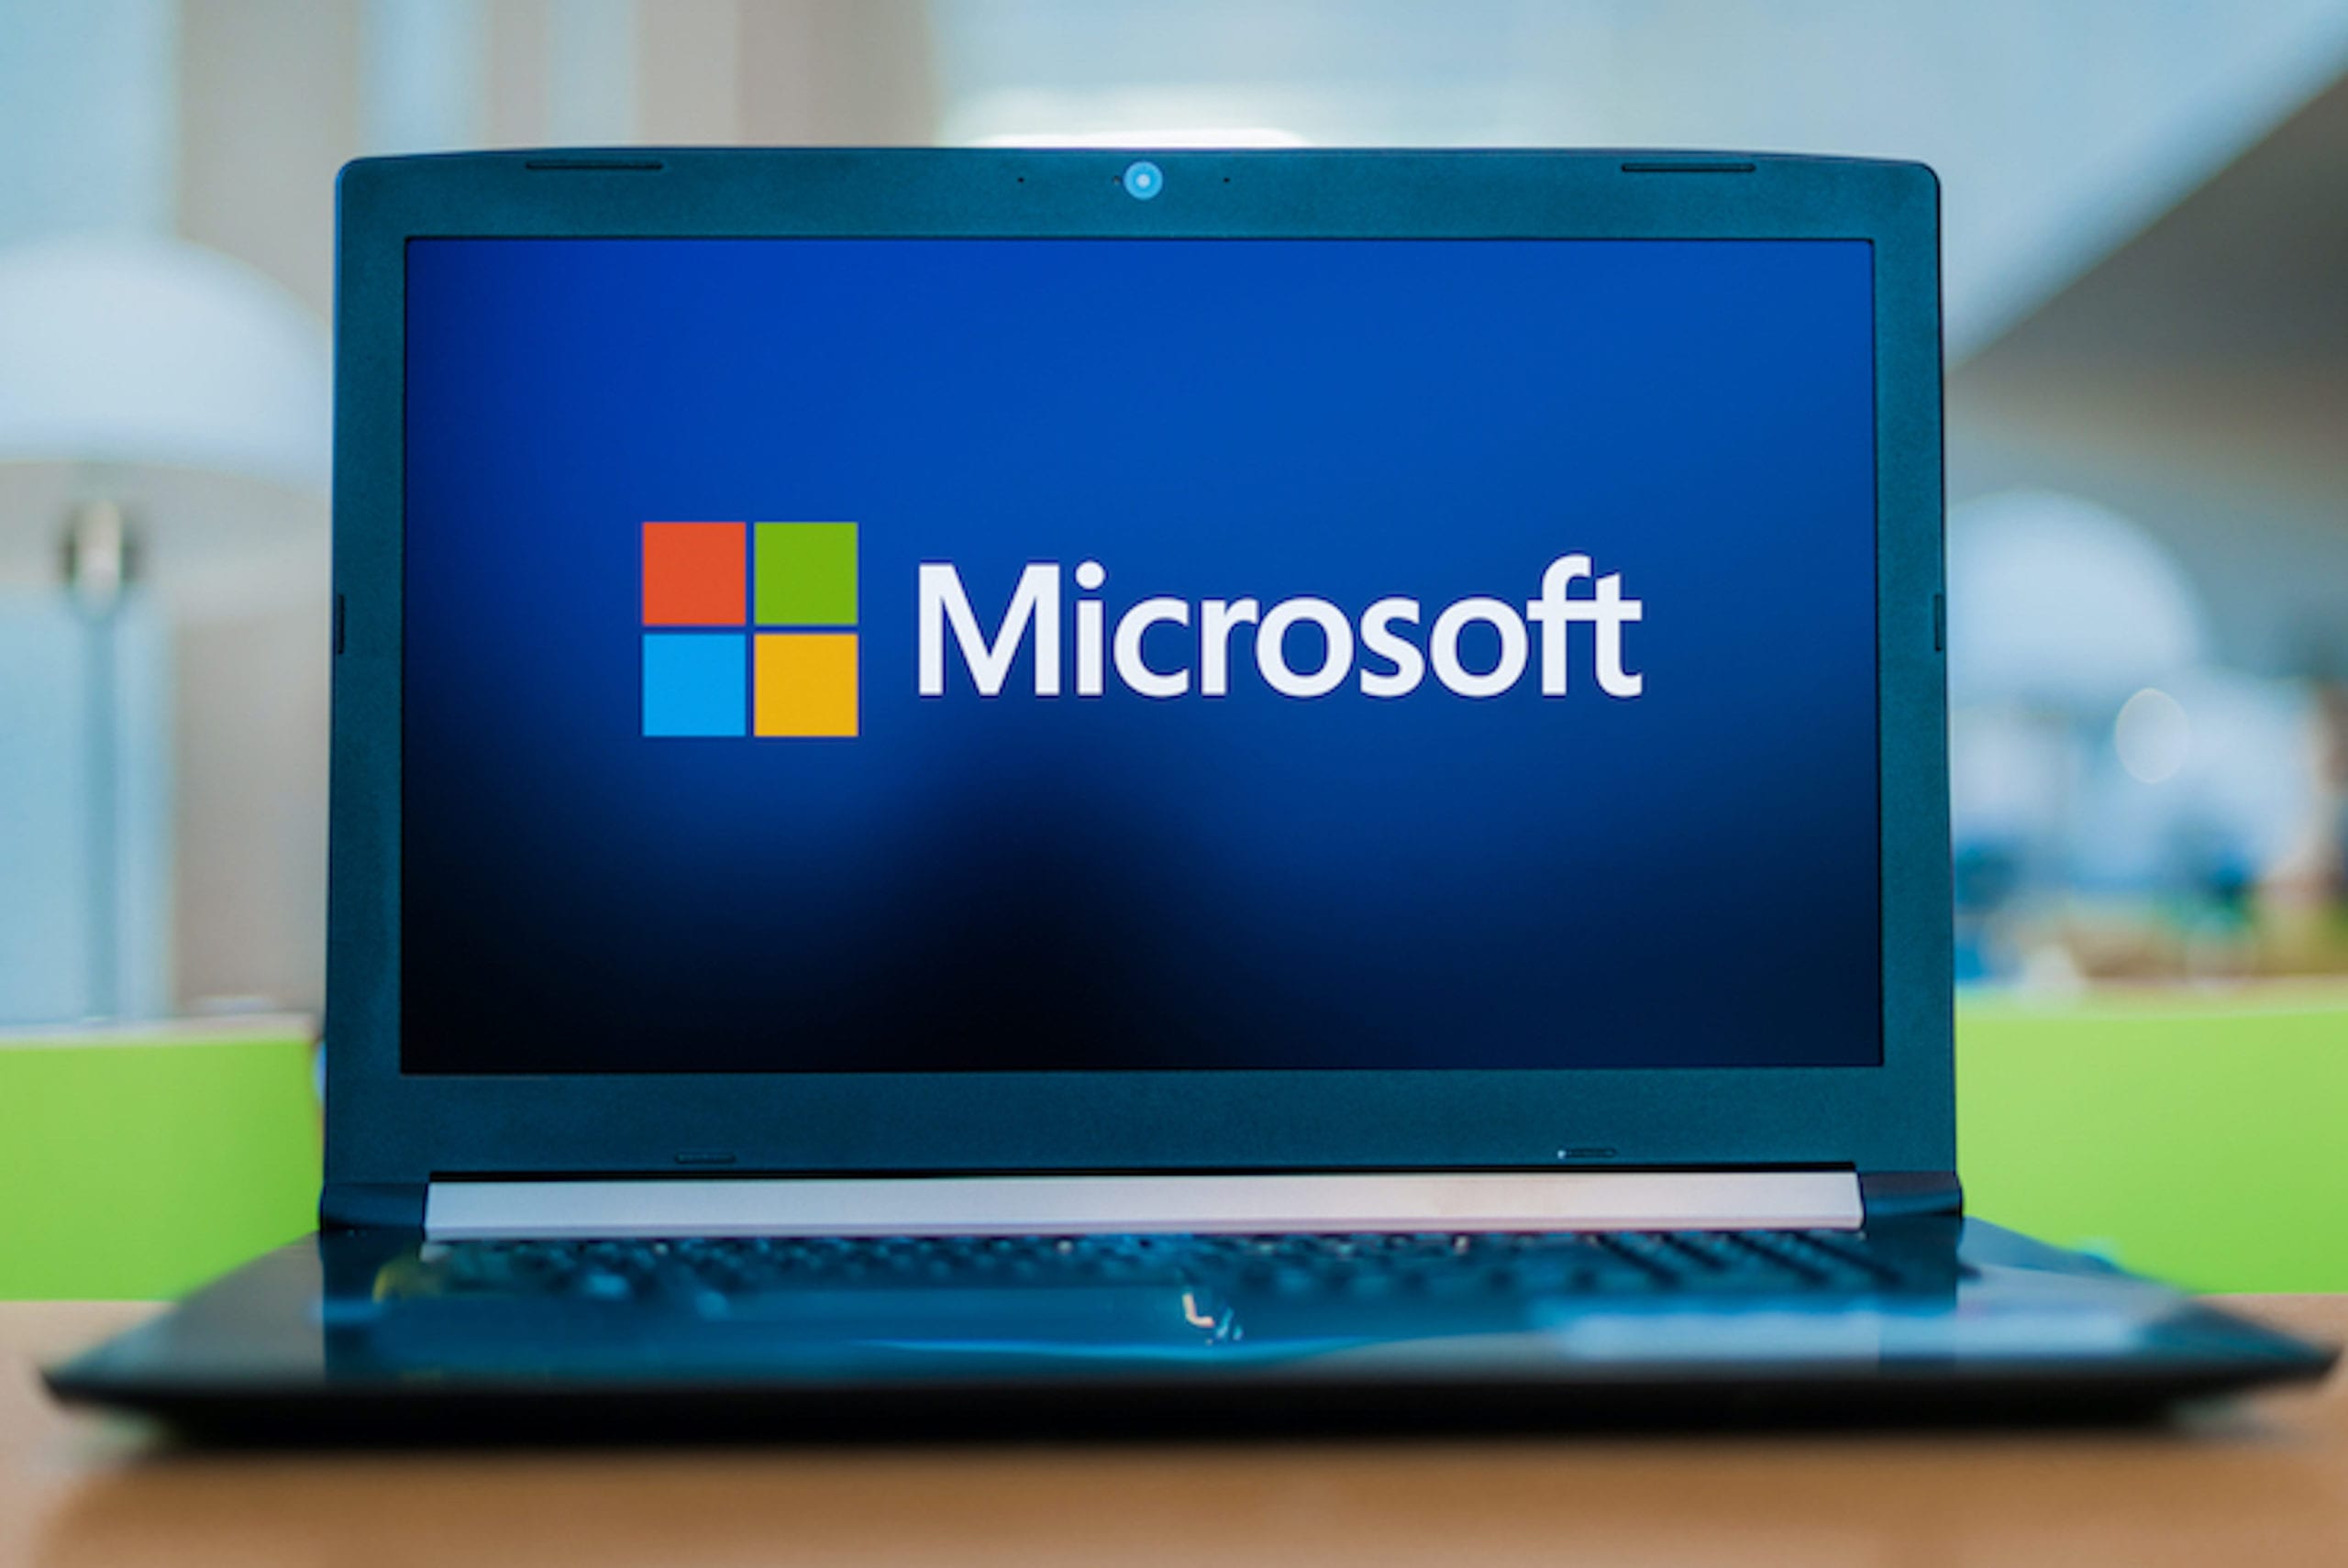 5 Reasons to Use an IT Company to Set Up & Maintain Your Microsoft 365 Account